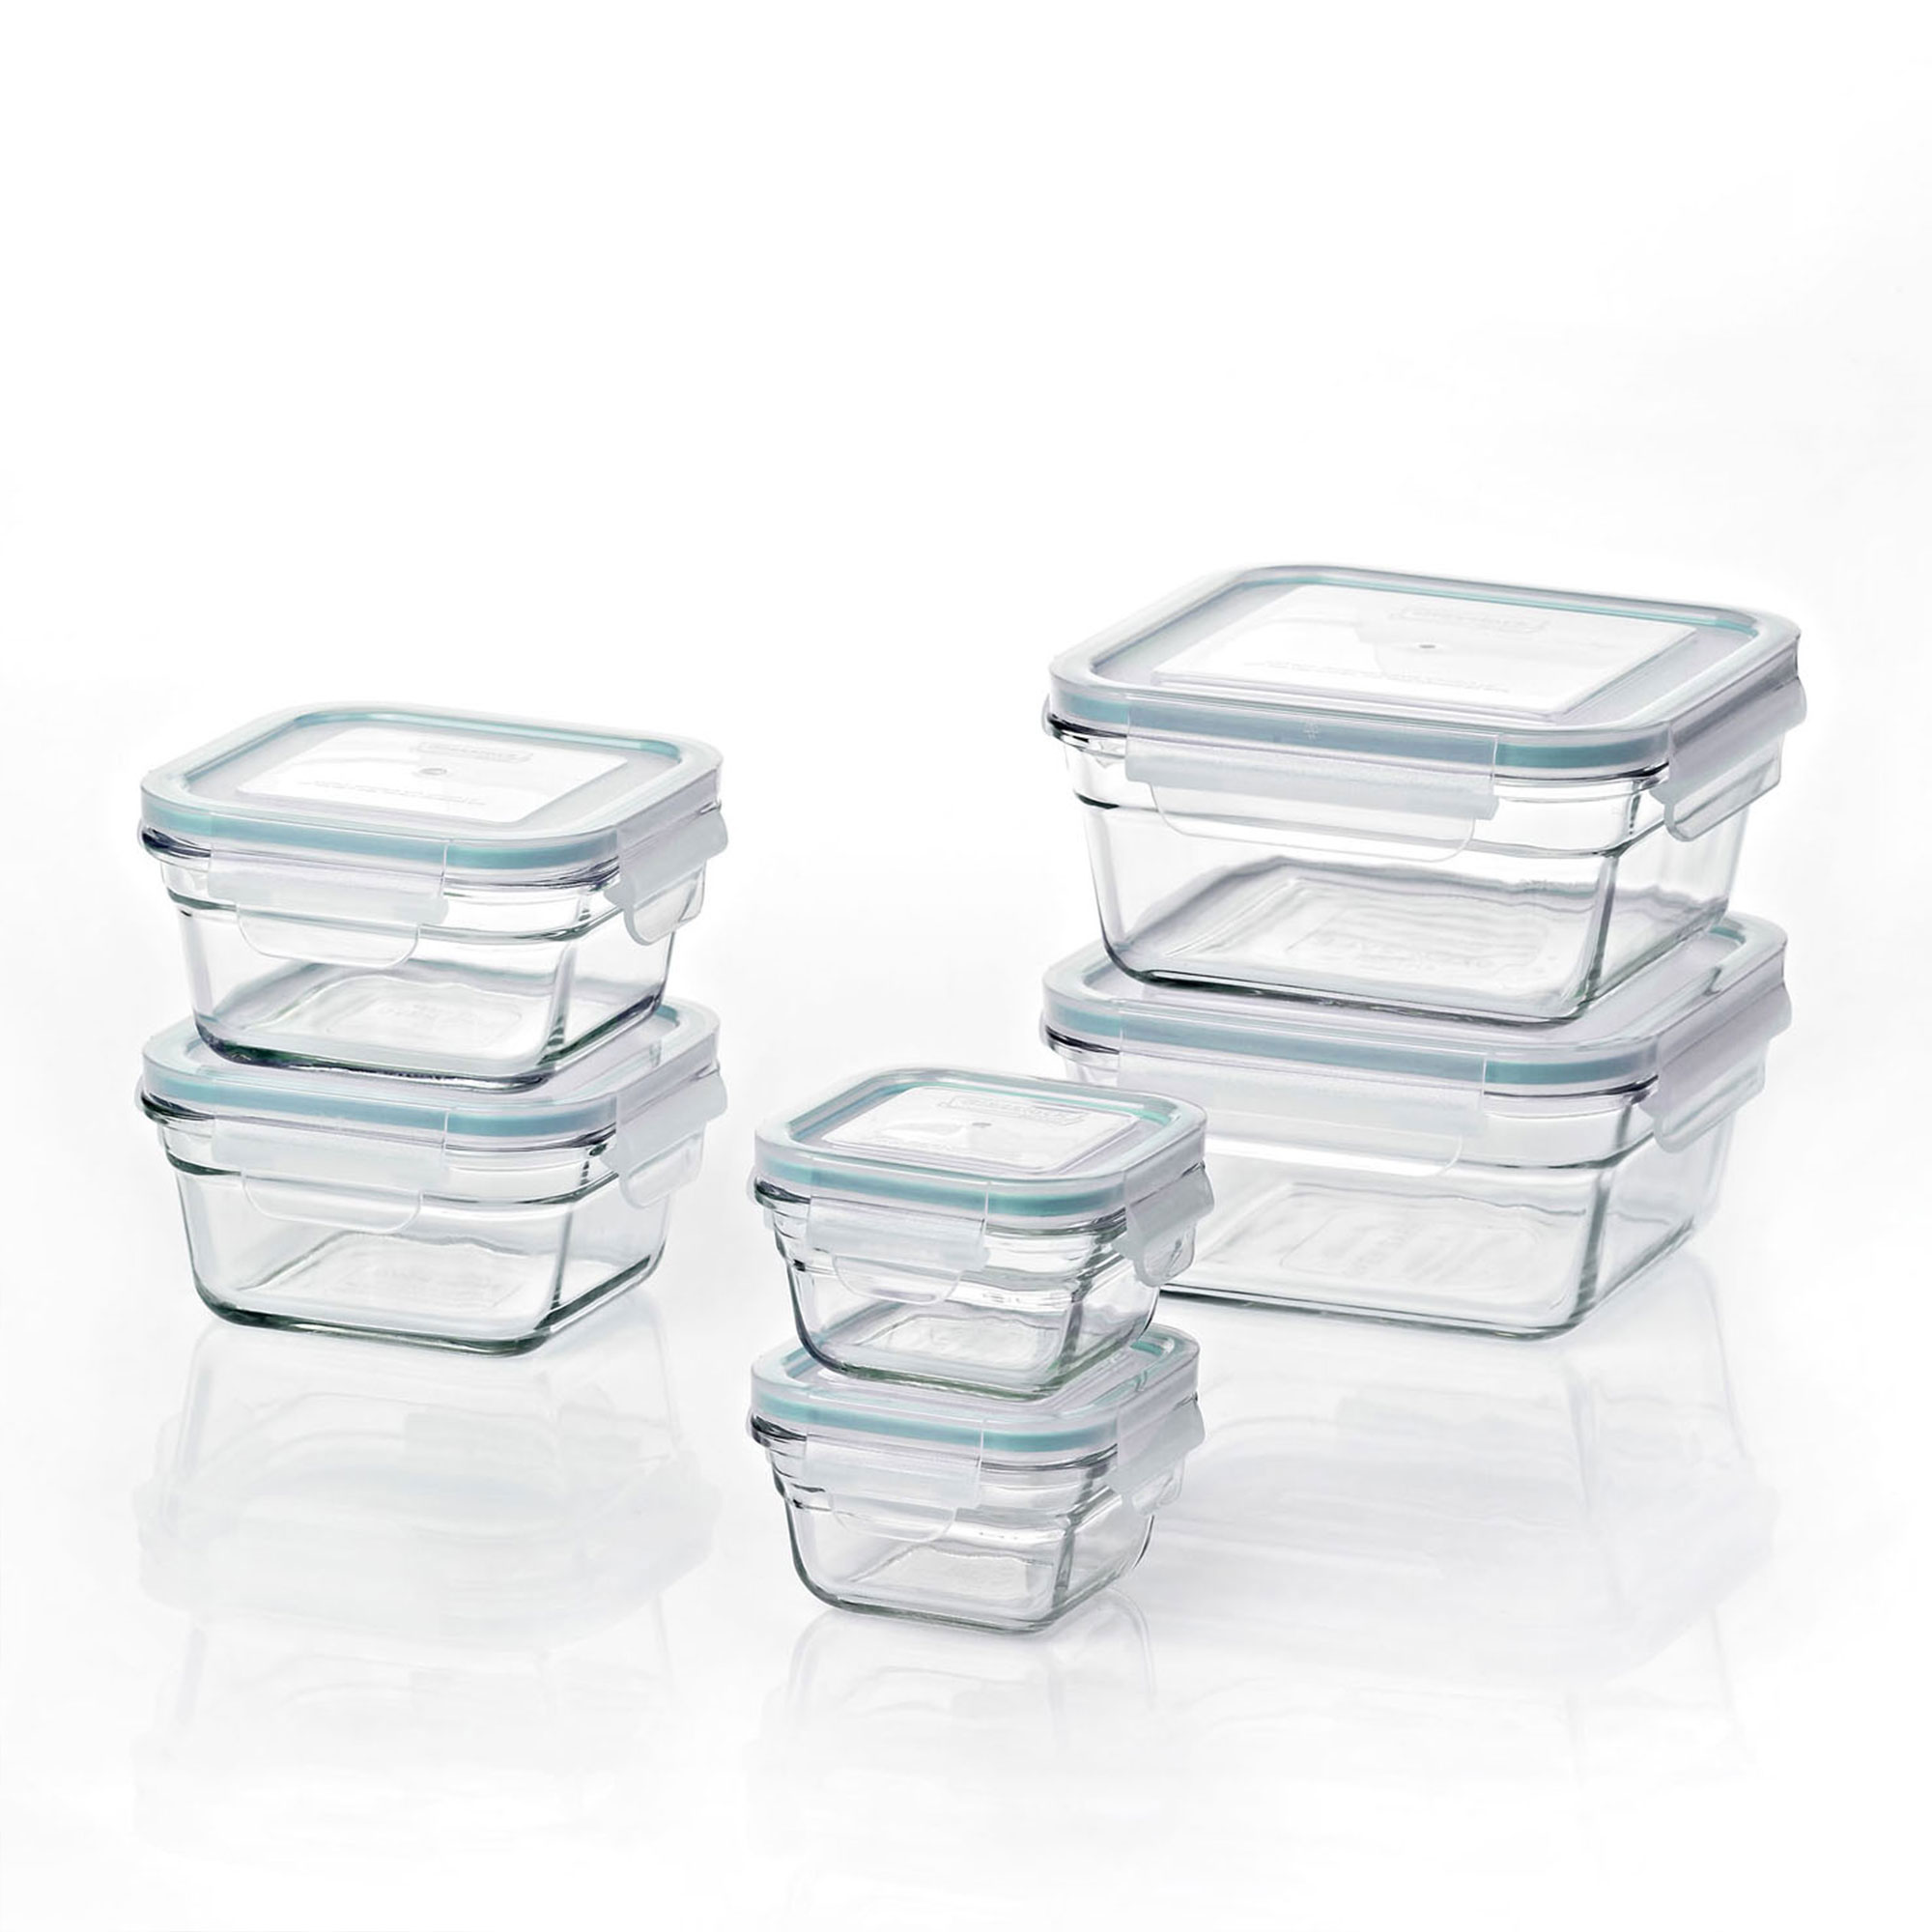 Glasslock Oven and Microwave Safe Glass Food Storage Containers 12 Piece Set - image 1 of 8